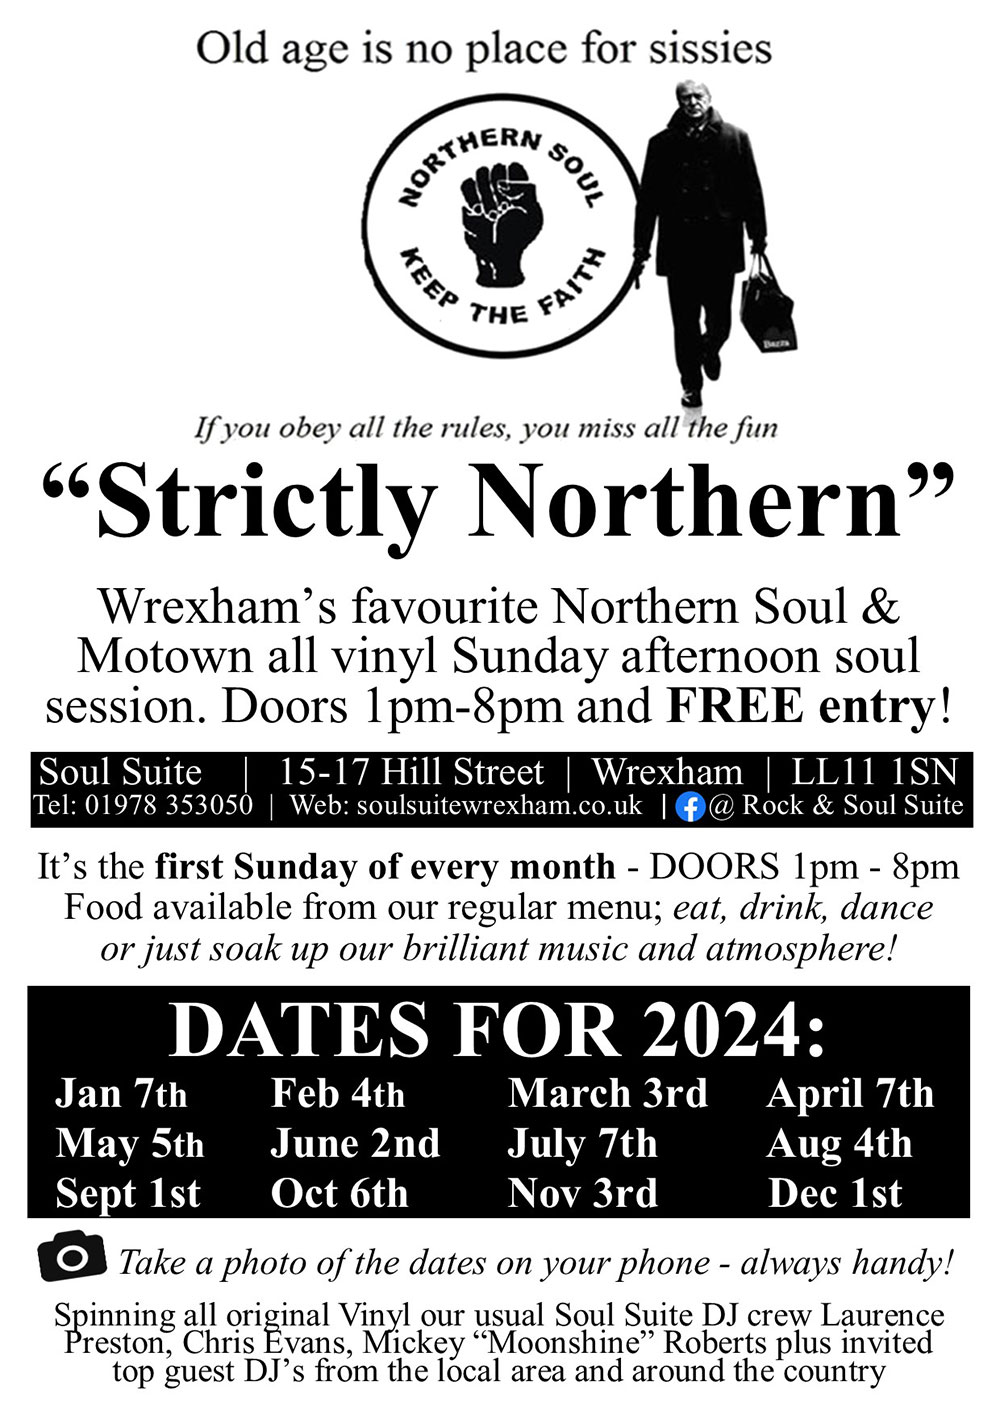 Strictly Northern